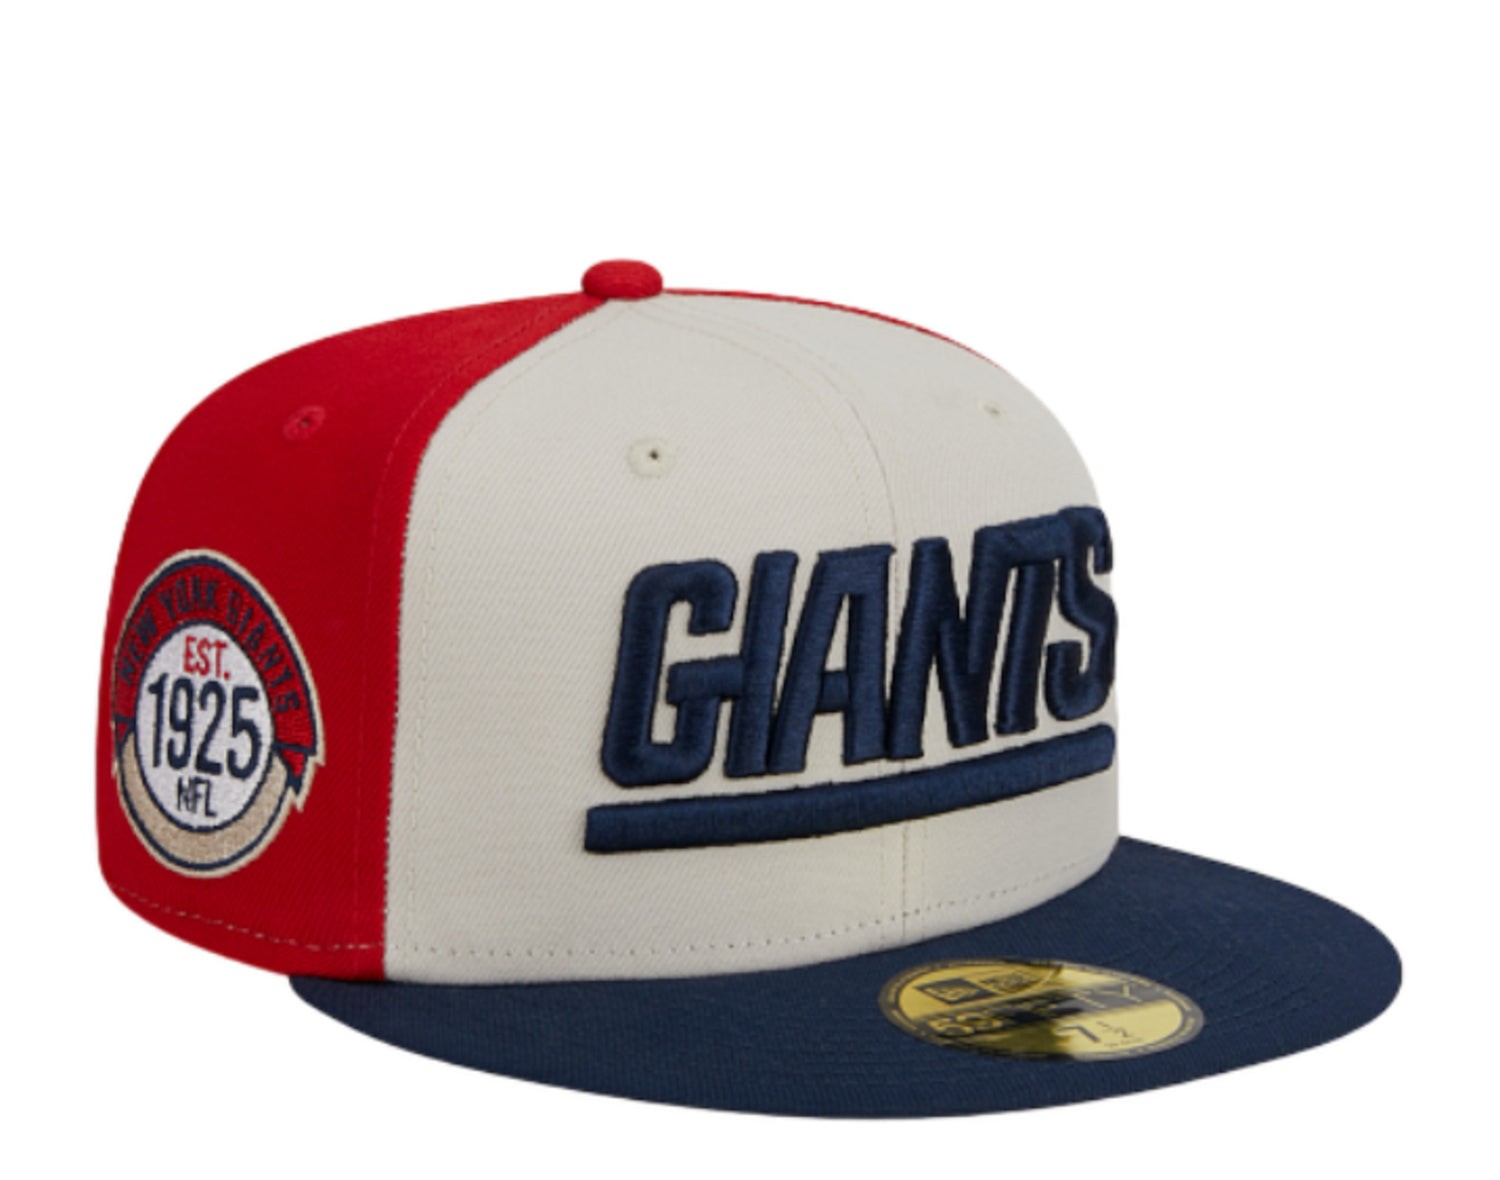 New Era - 59fifty - Fitted Hats - NFL